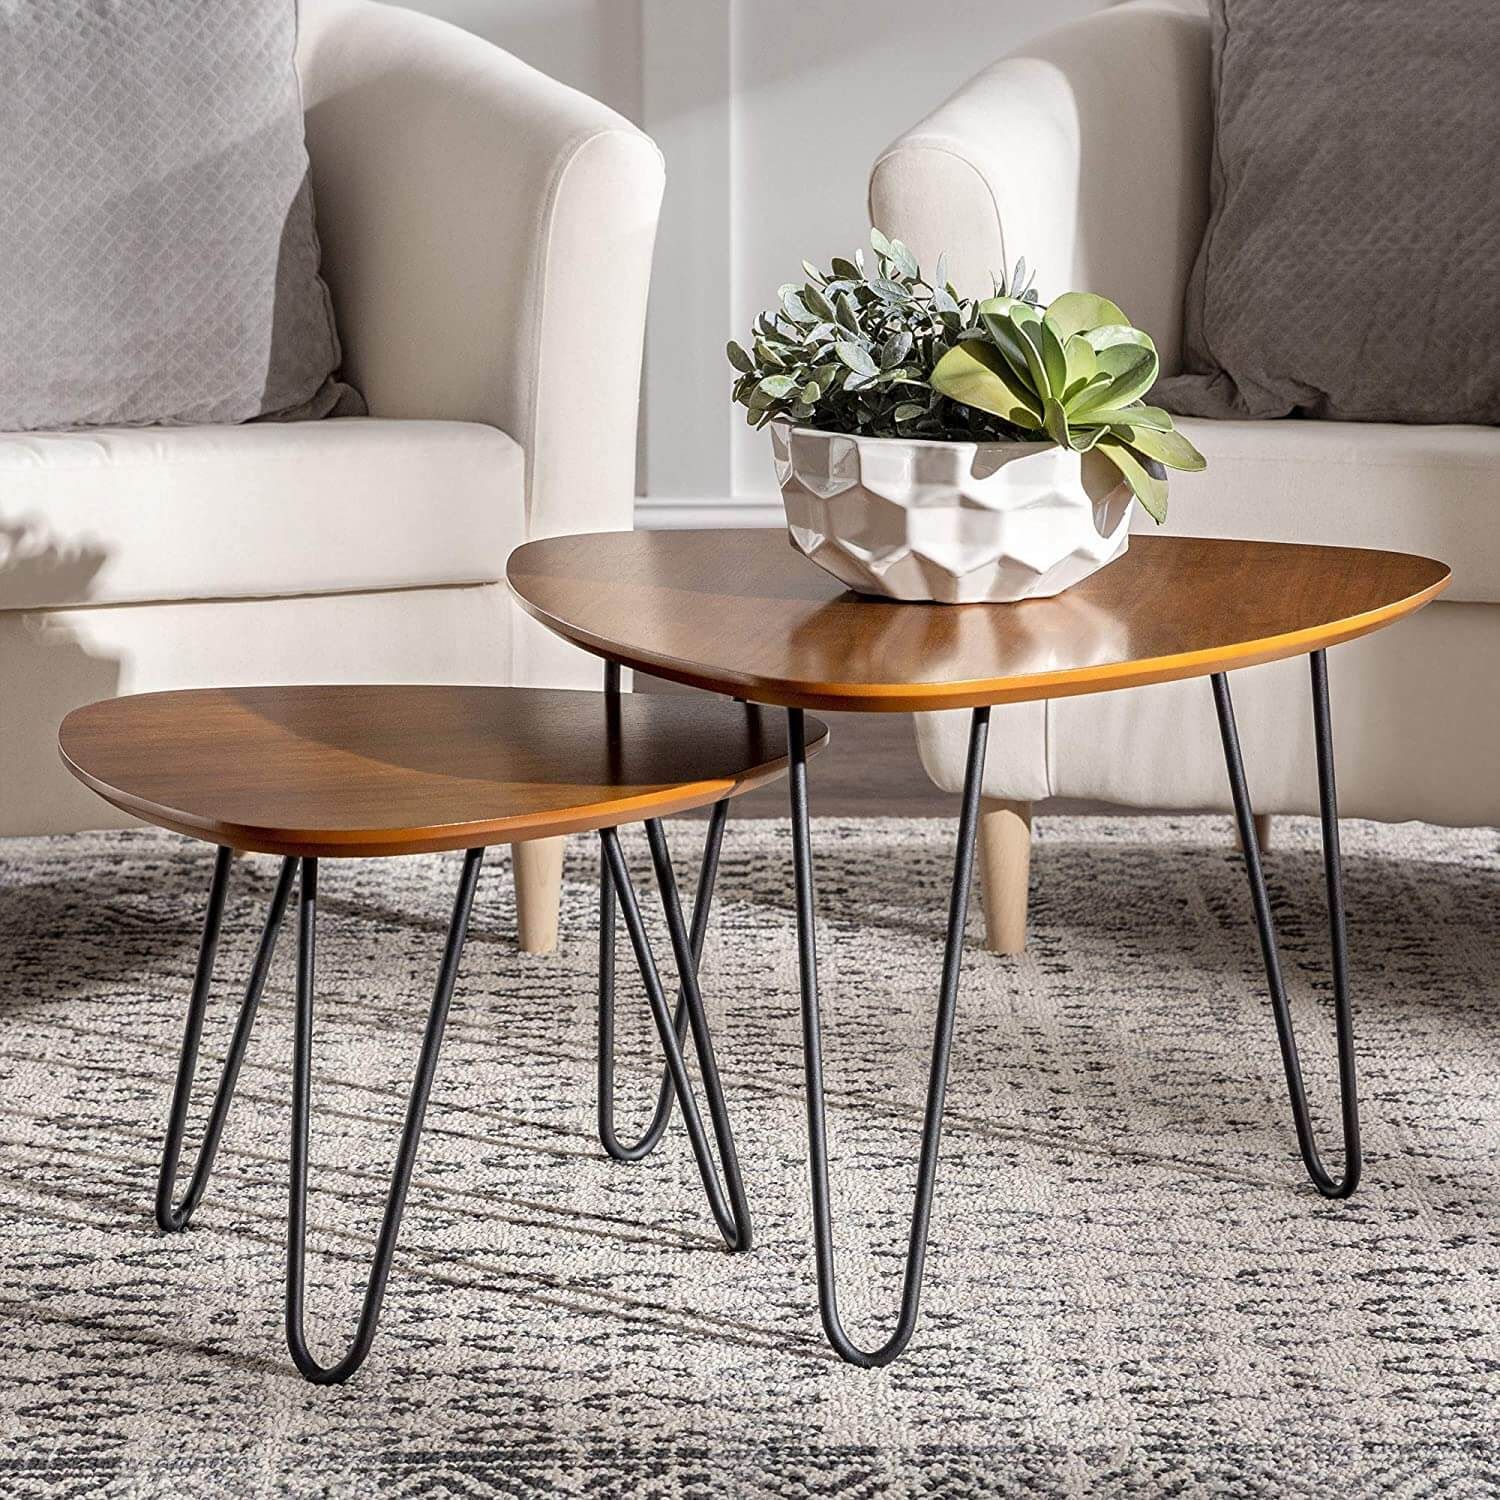 Choosing The Perfect Mid Century Modern Coffee Table – Oceanone Interiors With Regard To Mid Century Modern Coffee Tables (View 14 of 20)